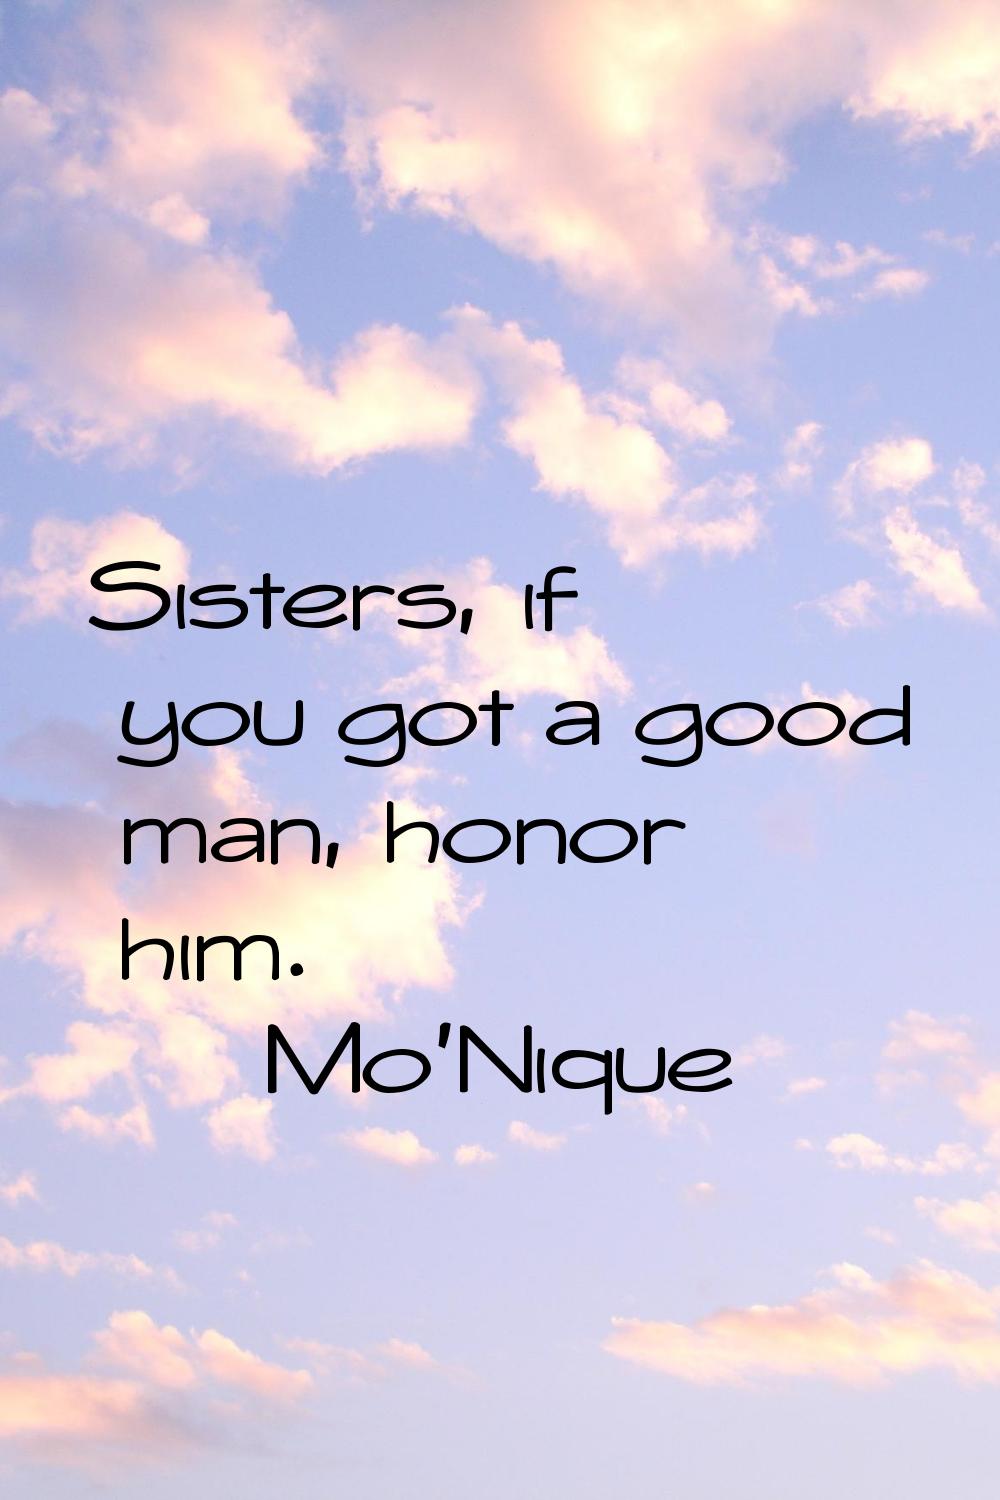 Sisters, if you got a good man, honor him.